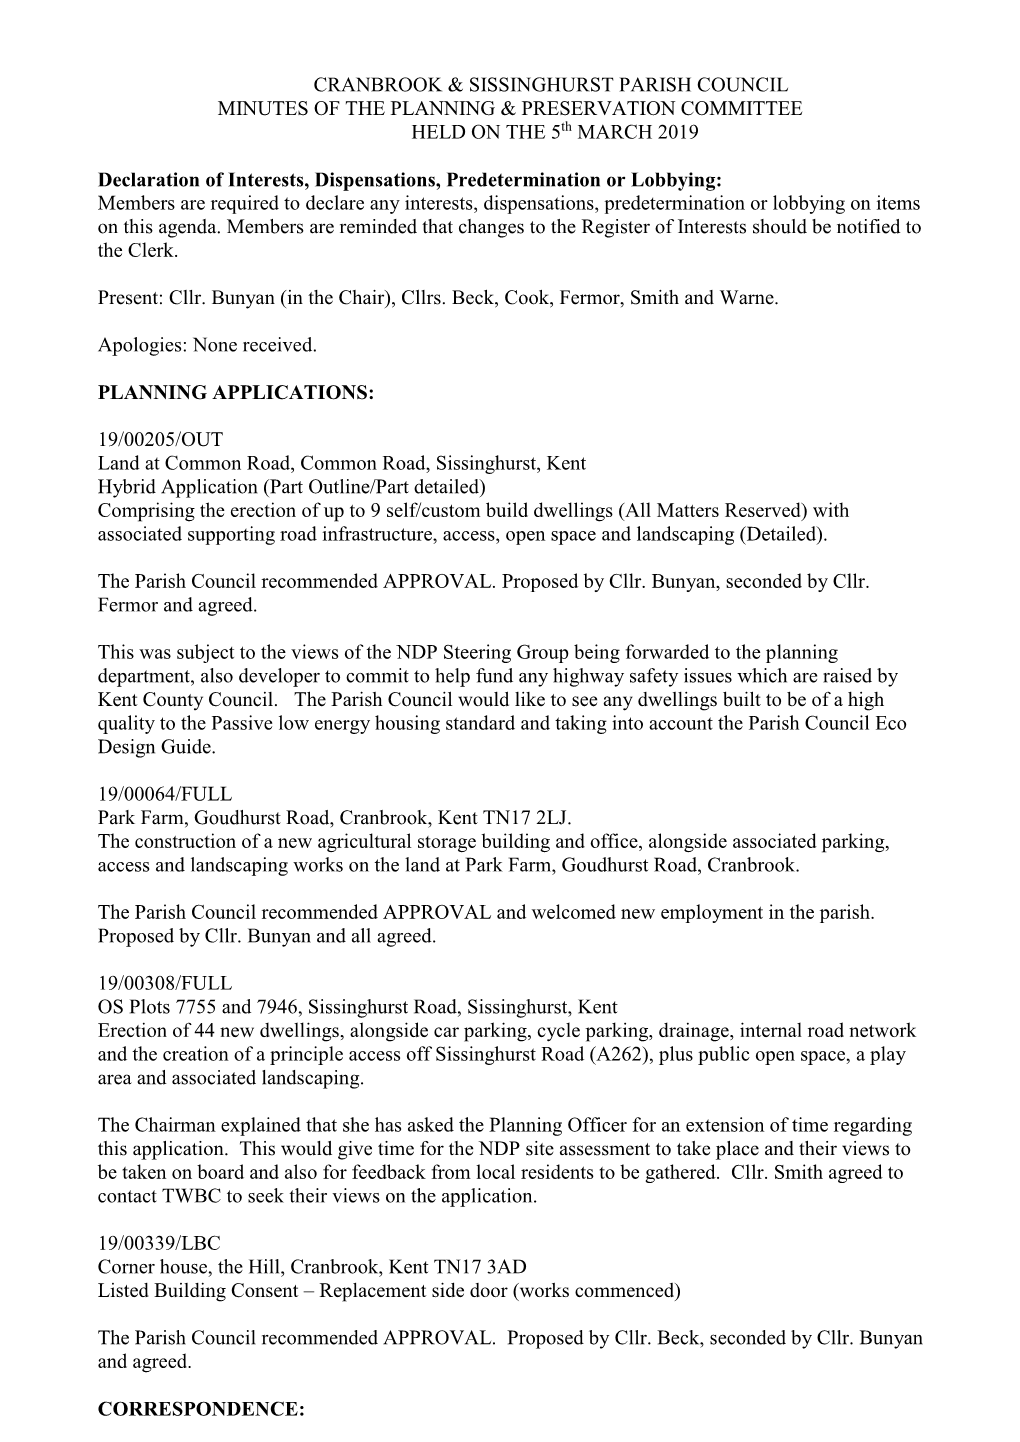 CRANBROOK & SISSINGHURST PARISH COUNCIL MINUTES of the PLANNING & PRESERVATION COMMITTEE HELD on the 5Th MARCH 2019 Decl